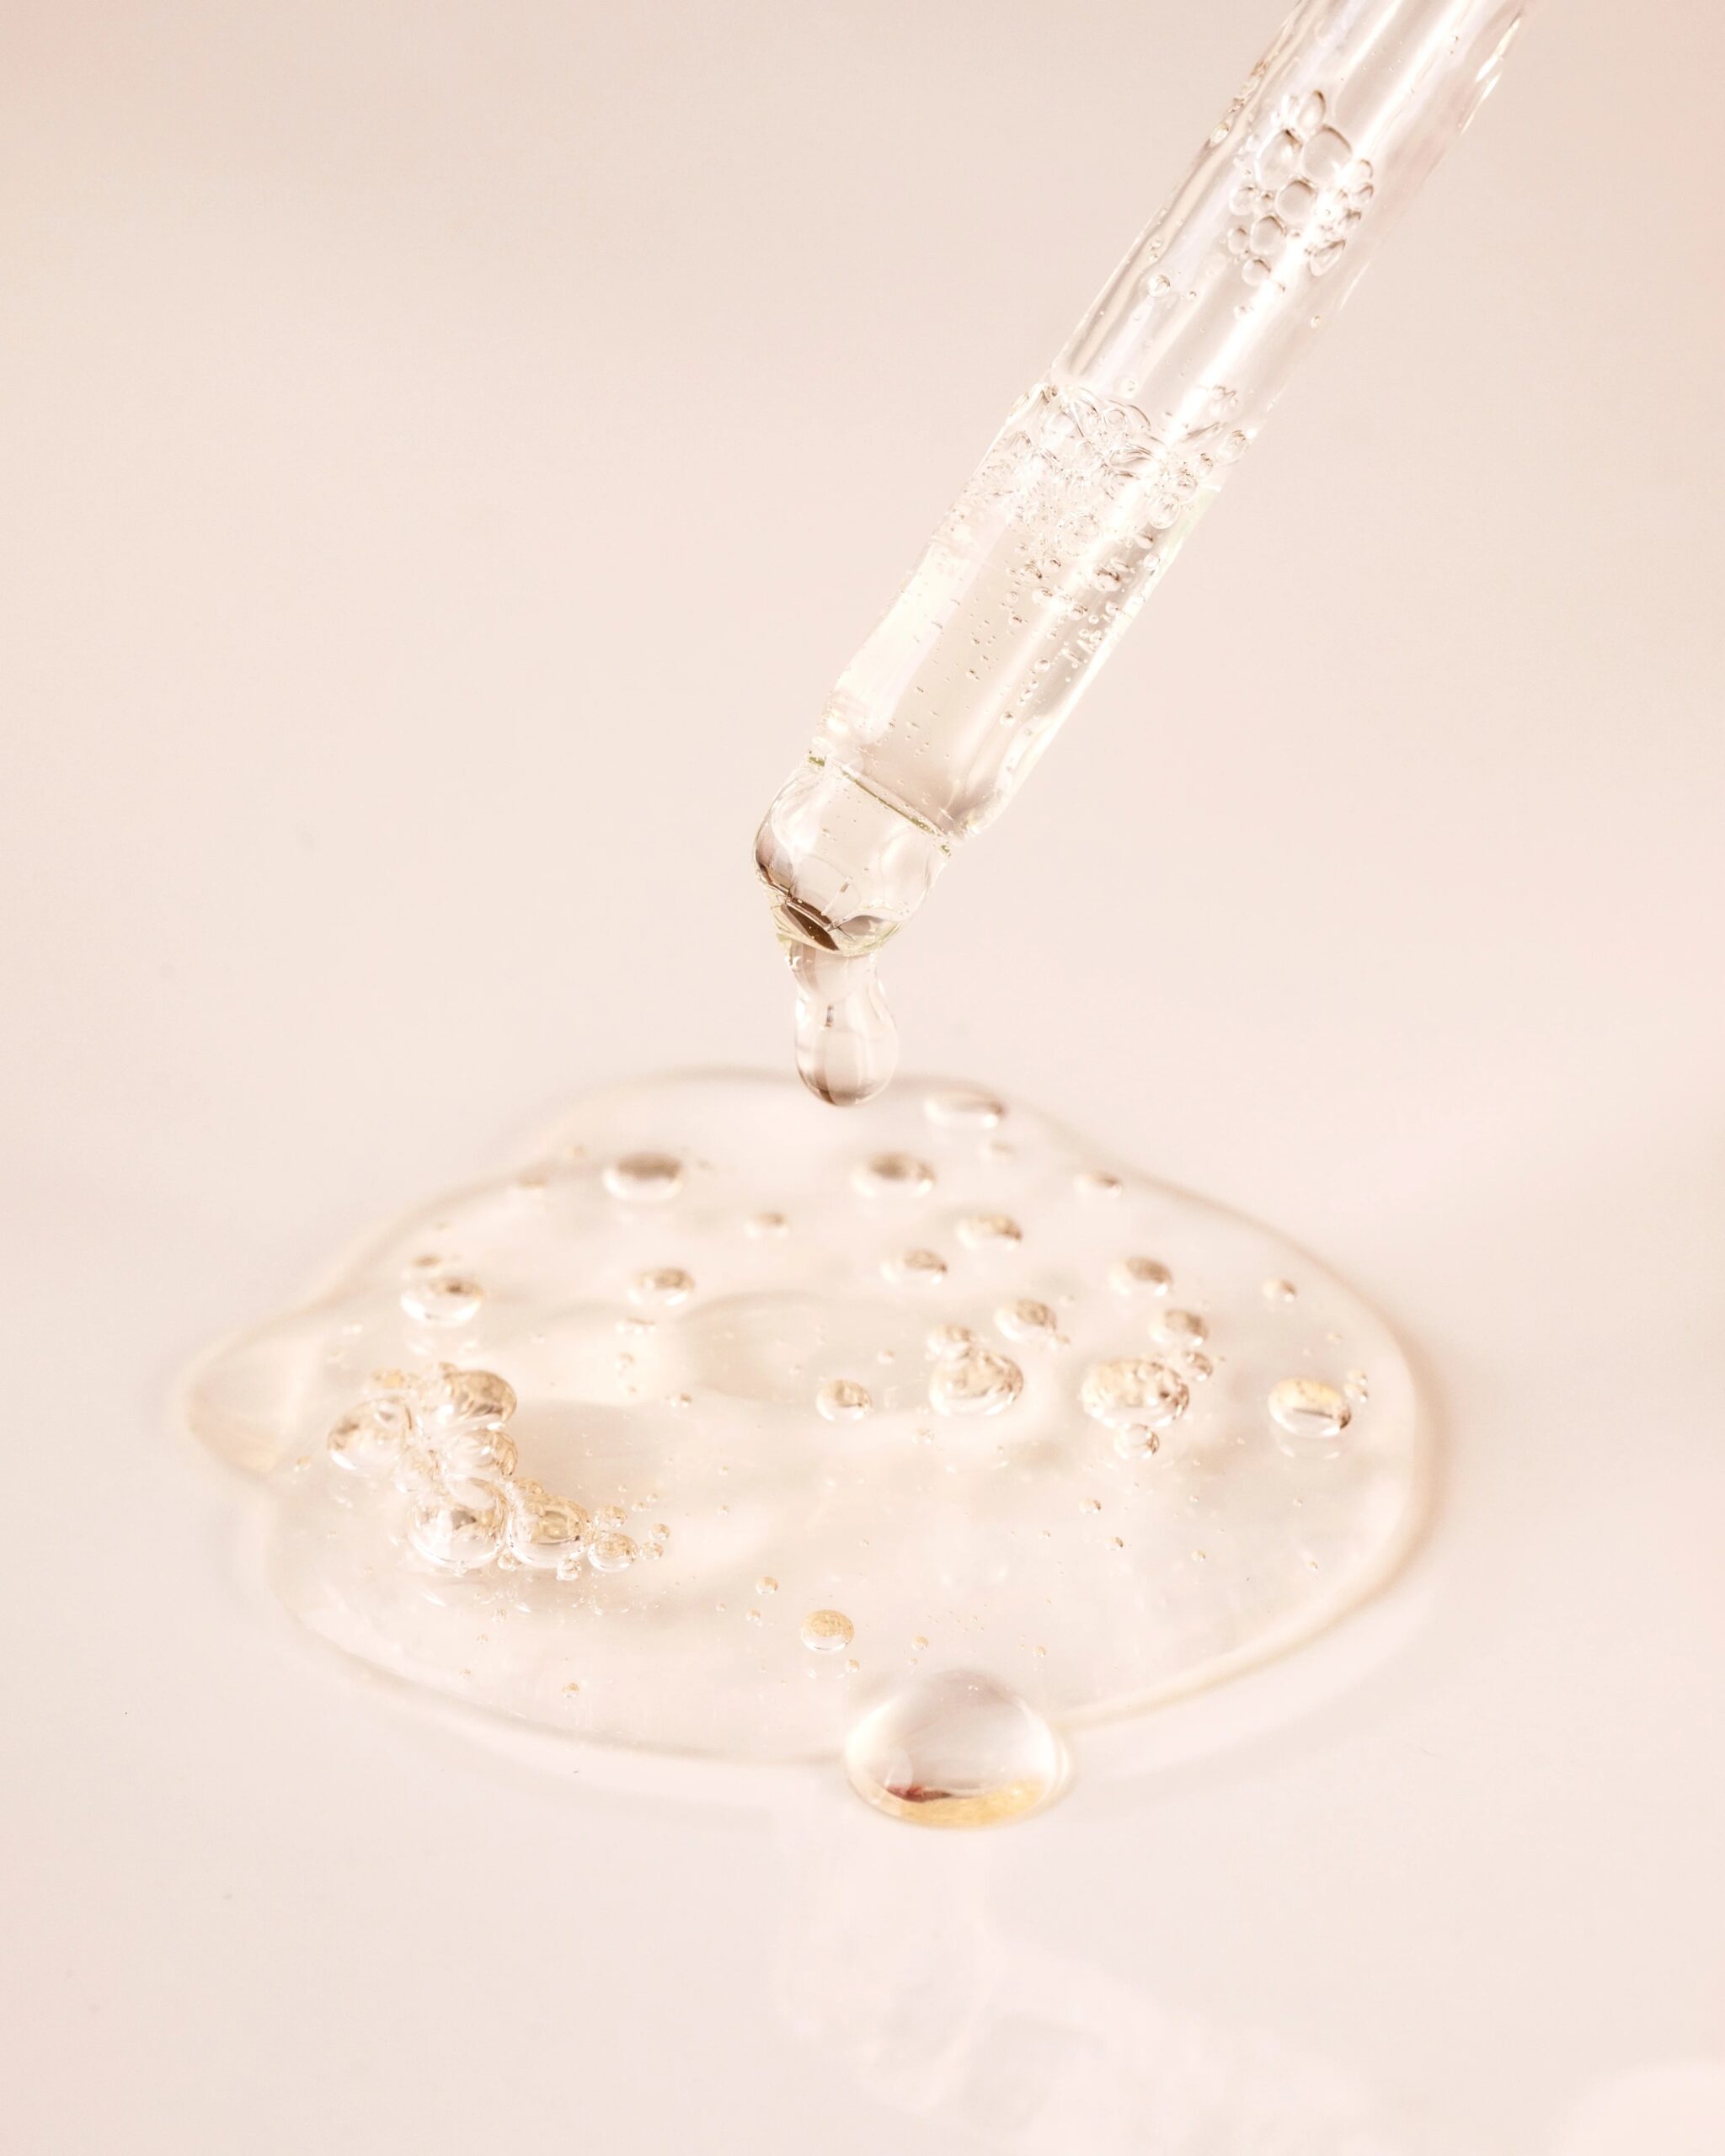 A close up of a dropper emptying serum into a puddle.